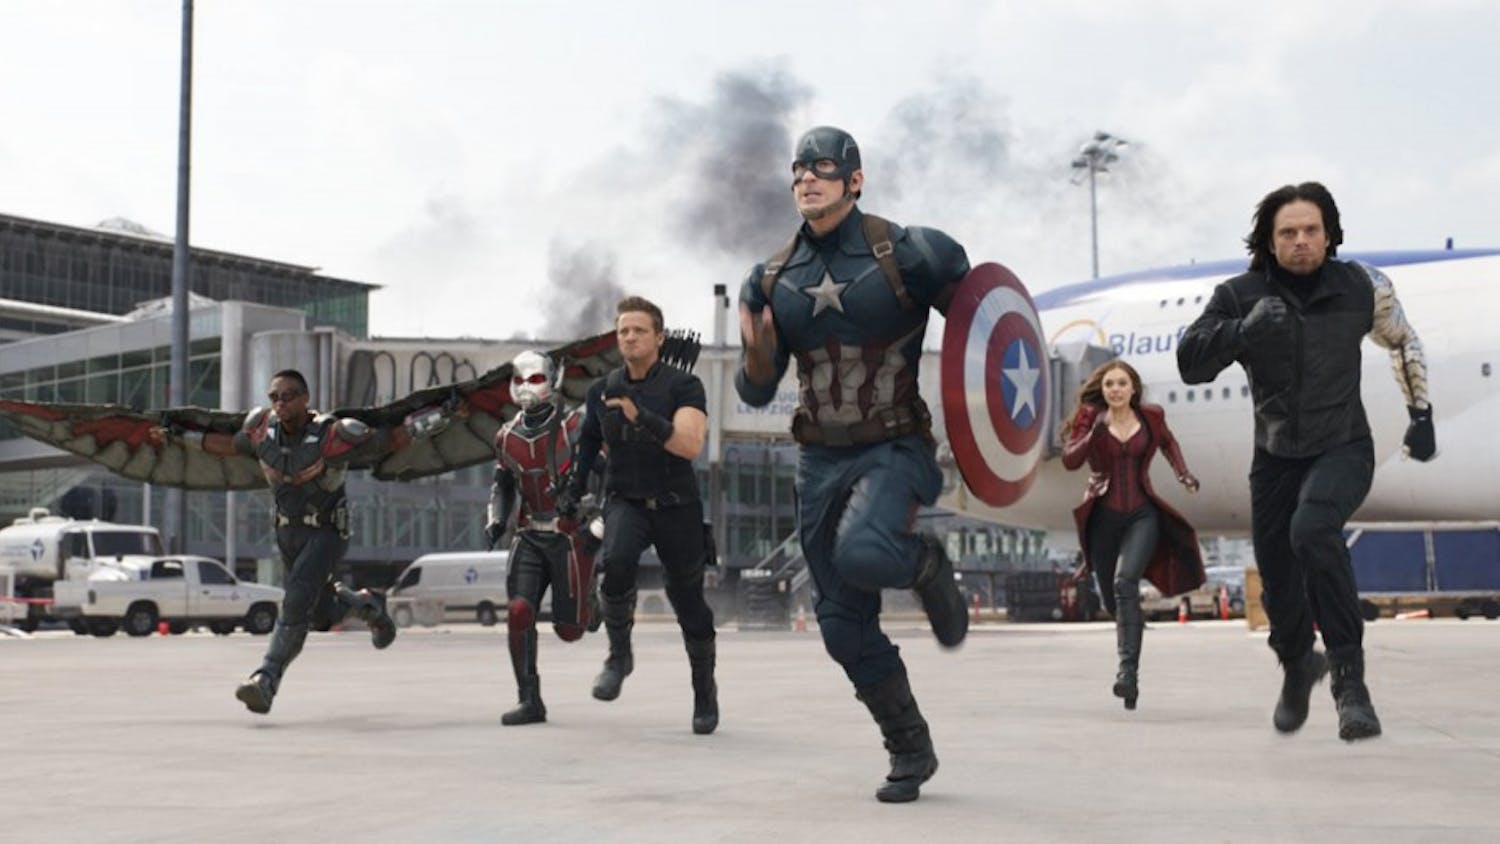 ENTER CAPTAIN-AMERICA-MOVIE-REVIEW 1 MCT